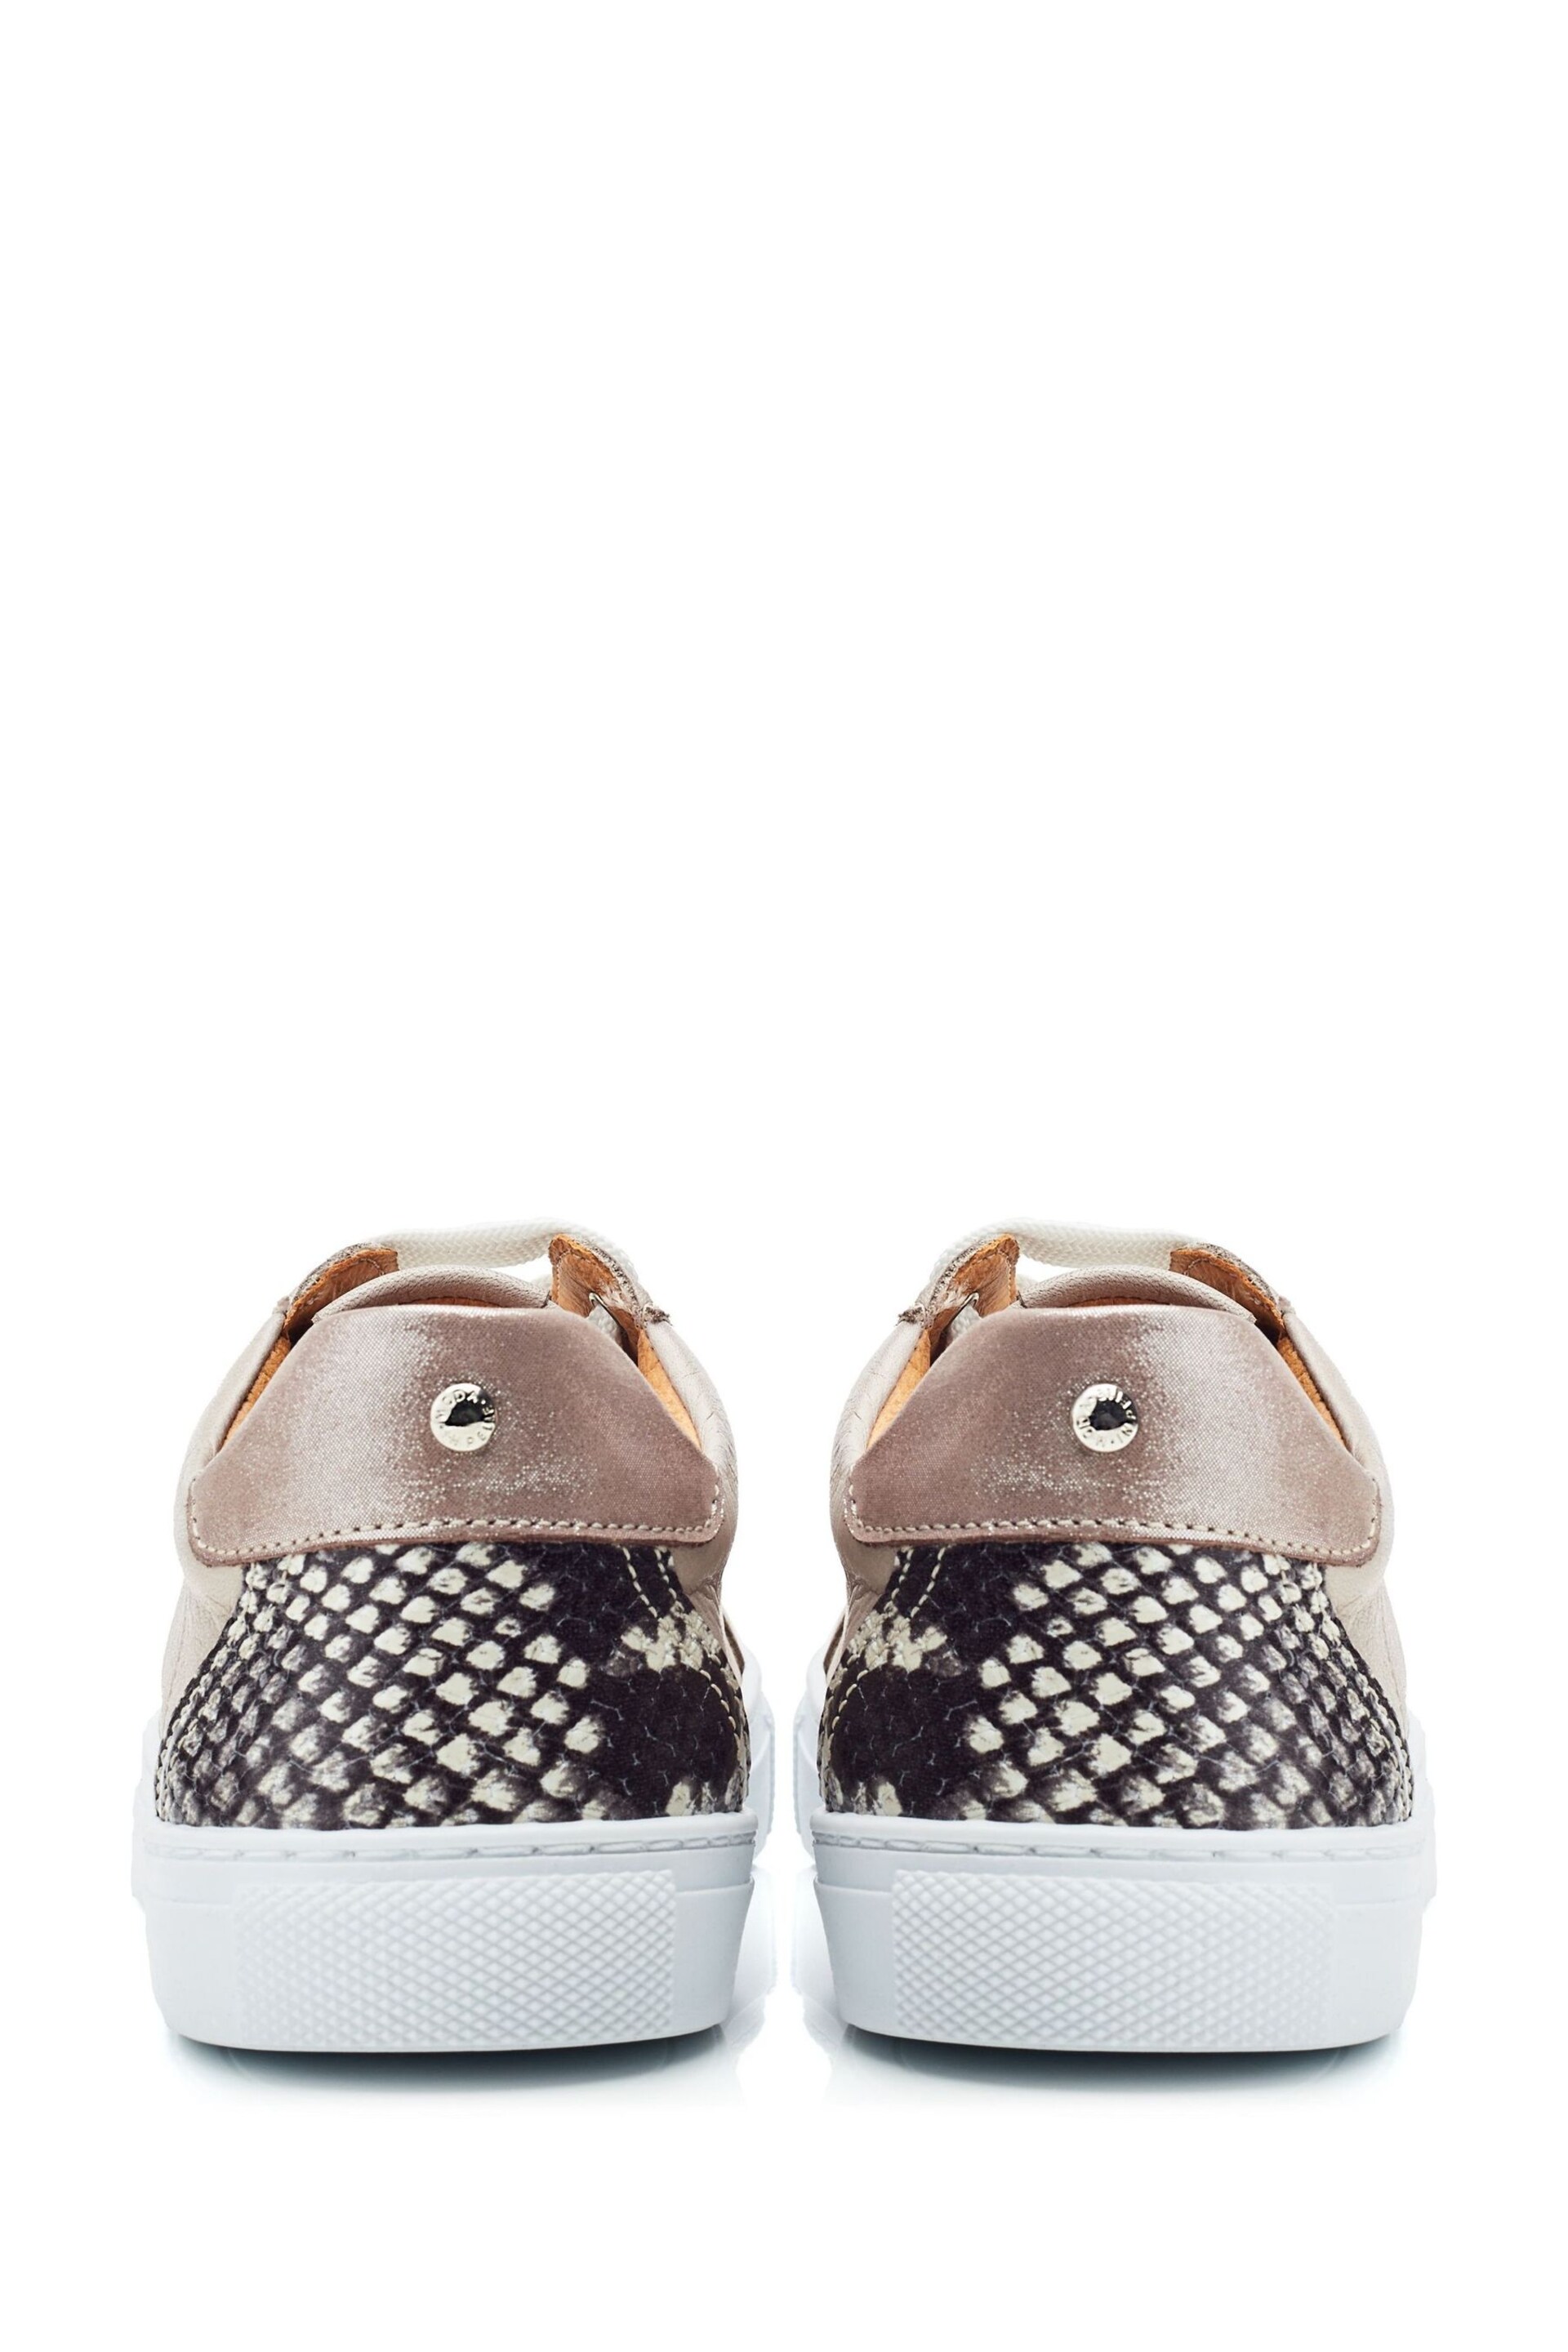 Moda in Pelle Slim Natural Braidie Sole Lace-Up Trainers - Image 3 of 4